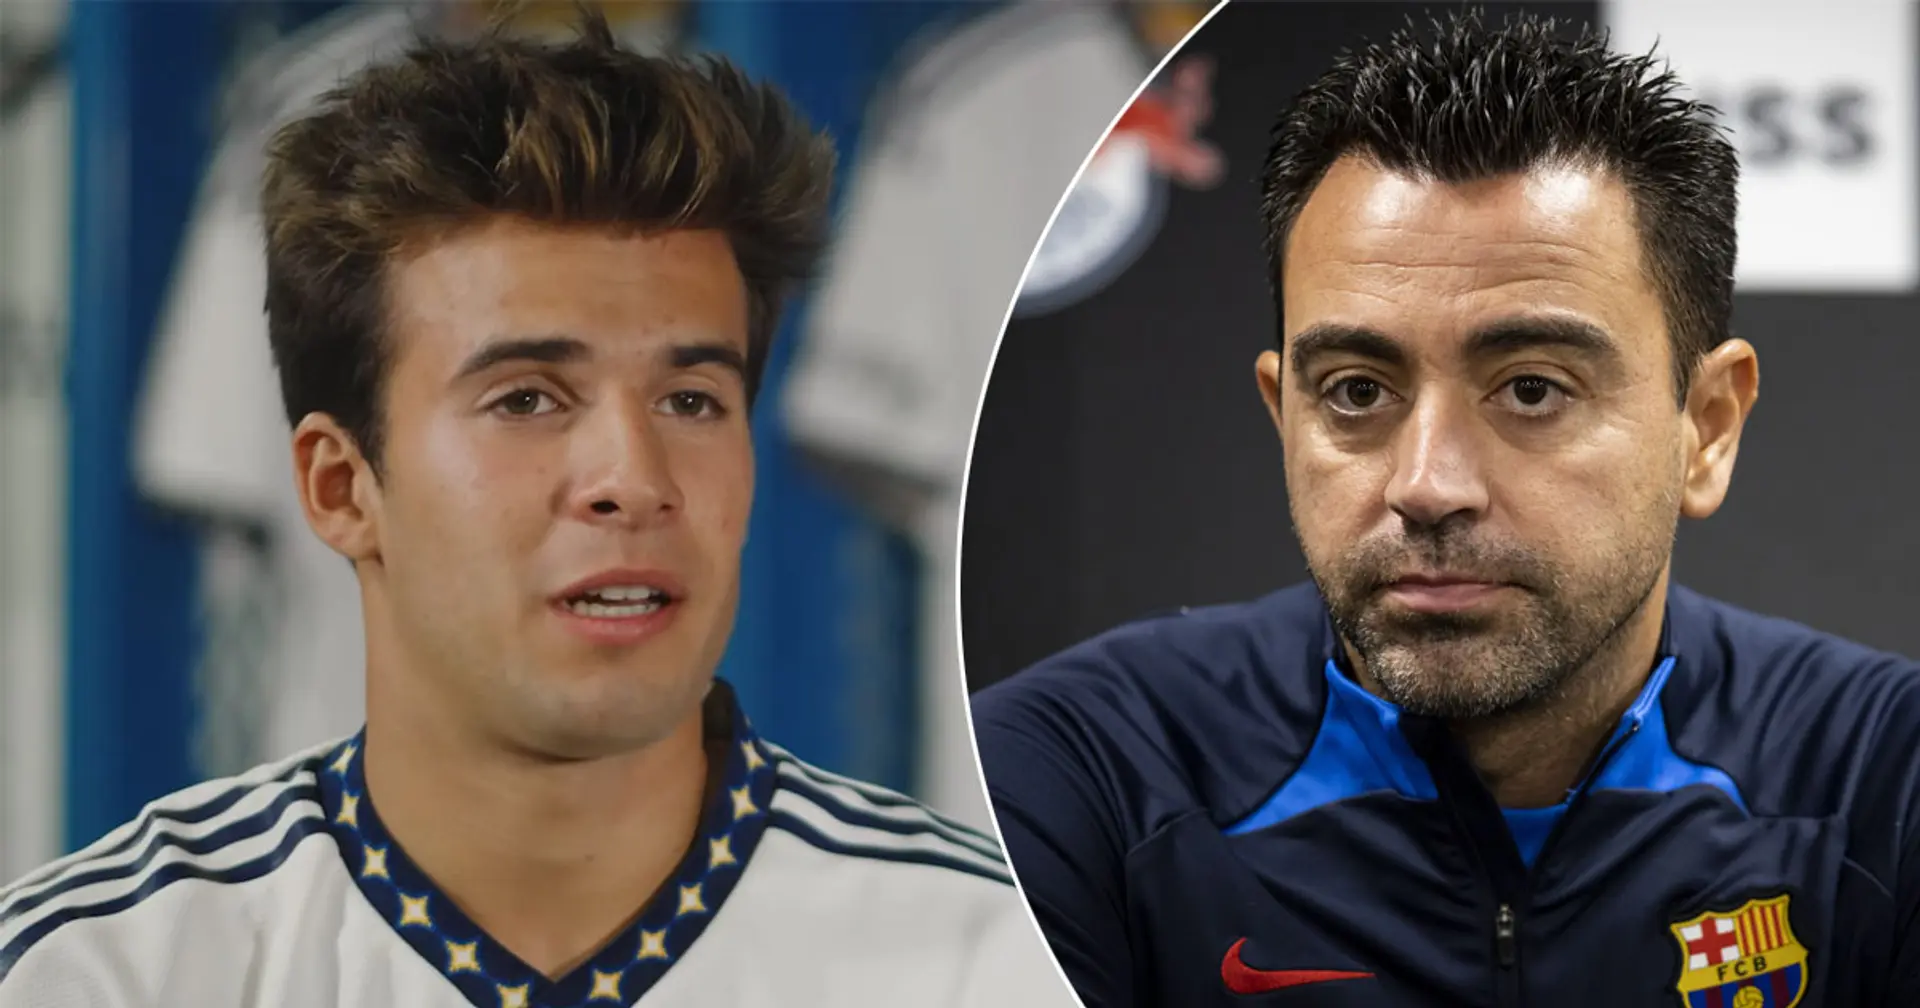 'Barca didn't have confidence in me': Riqui Puig on improved performances at LA Galaxy